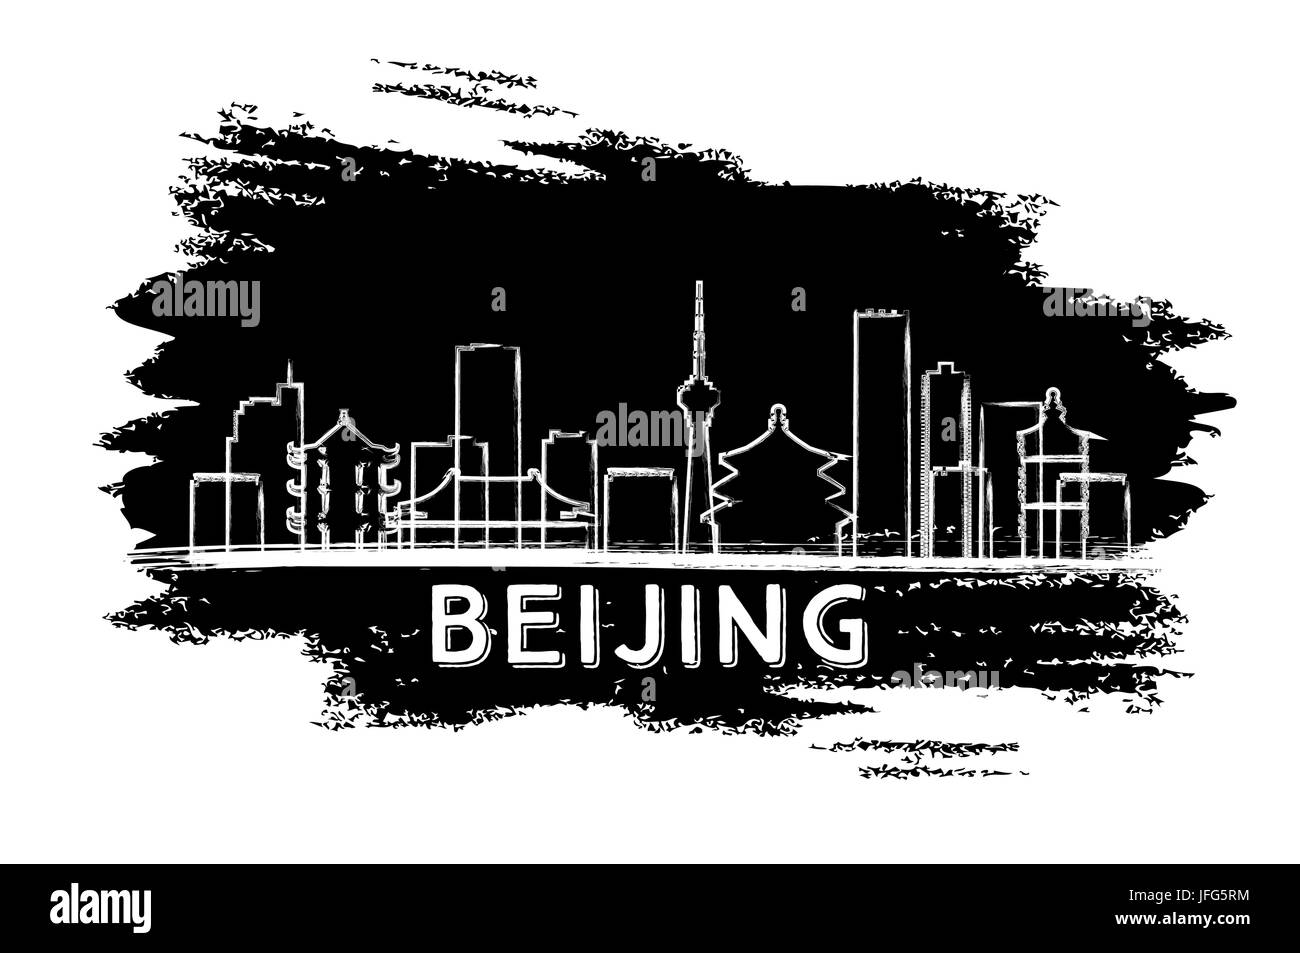 Beijing Skyline Silhouette. Hand Drawn Sketch. Vector Illustration. Business Travel and Tourism Concept with Modern Buildings. Image for Presentation Stock Vector